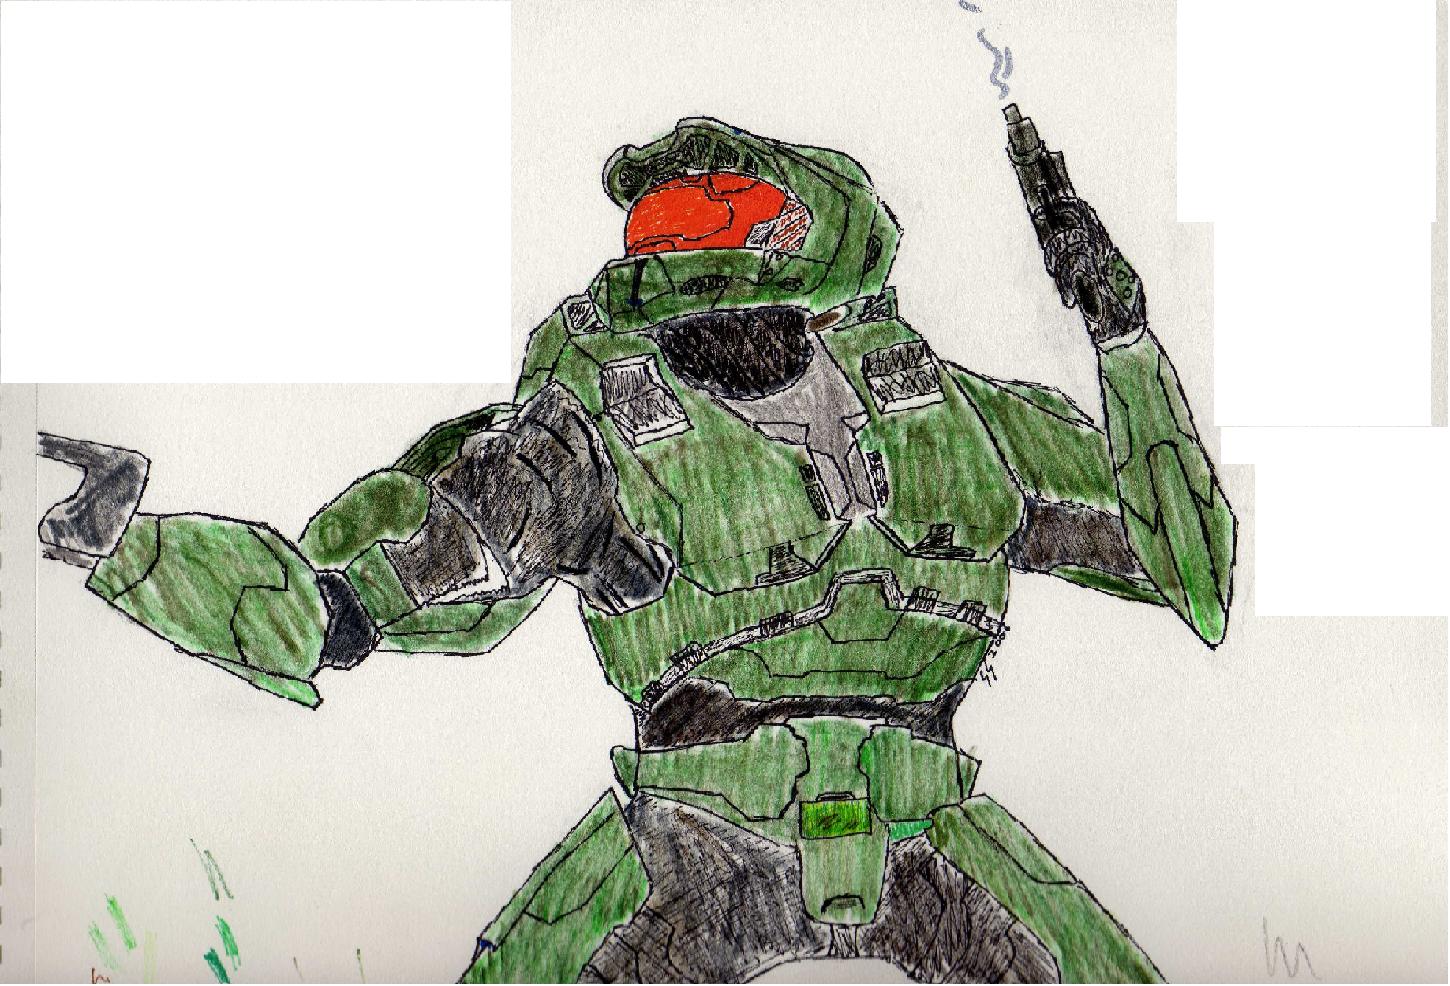 Master Chief doing what he does best... by sargewolf